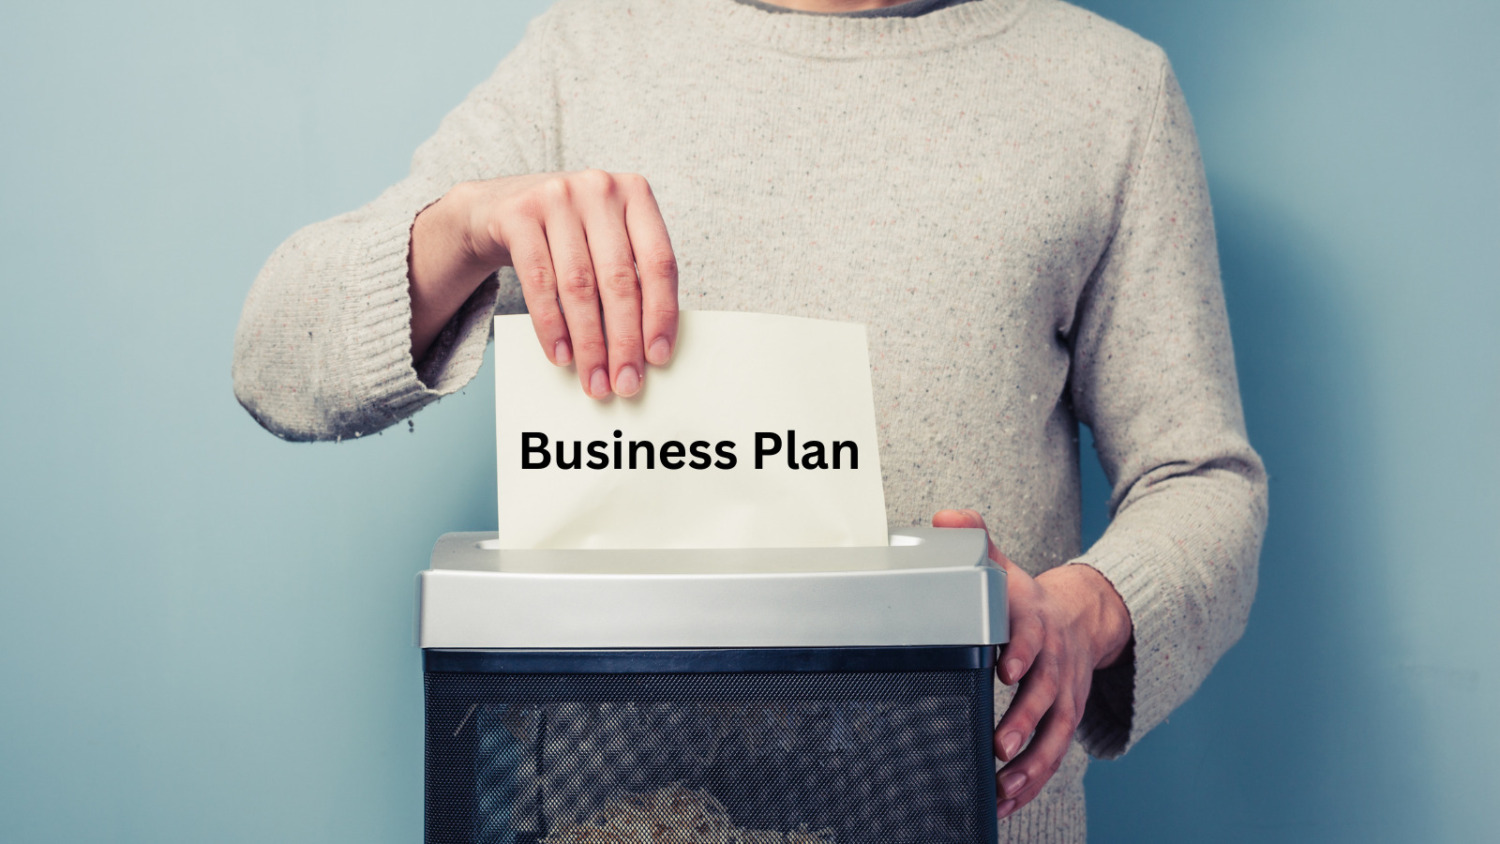 Are Business Plans Worthless?